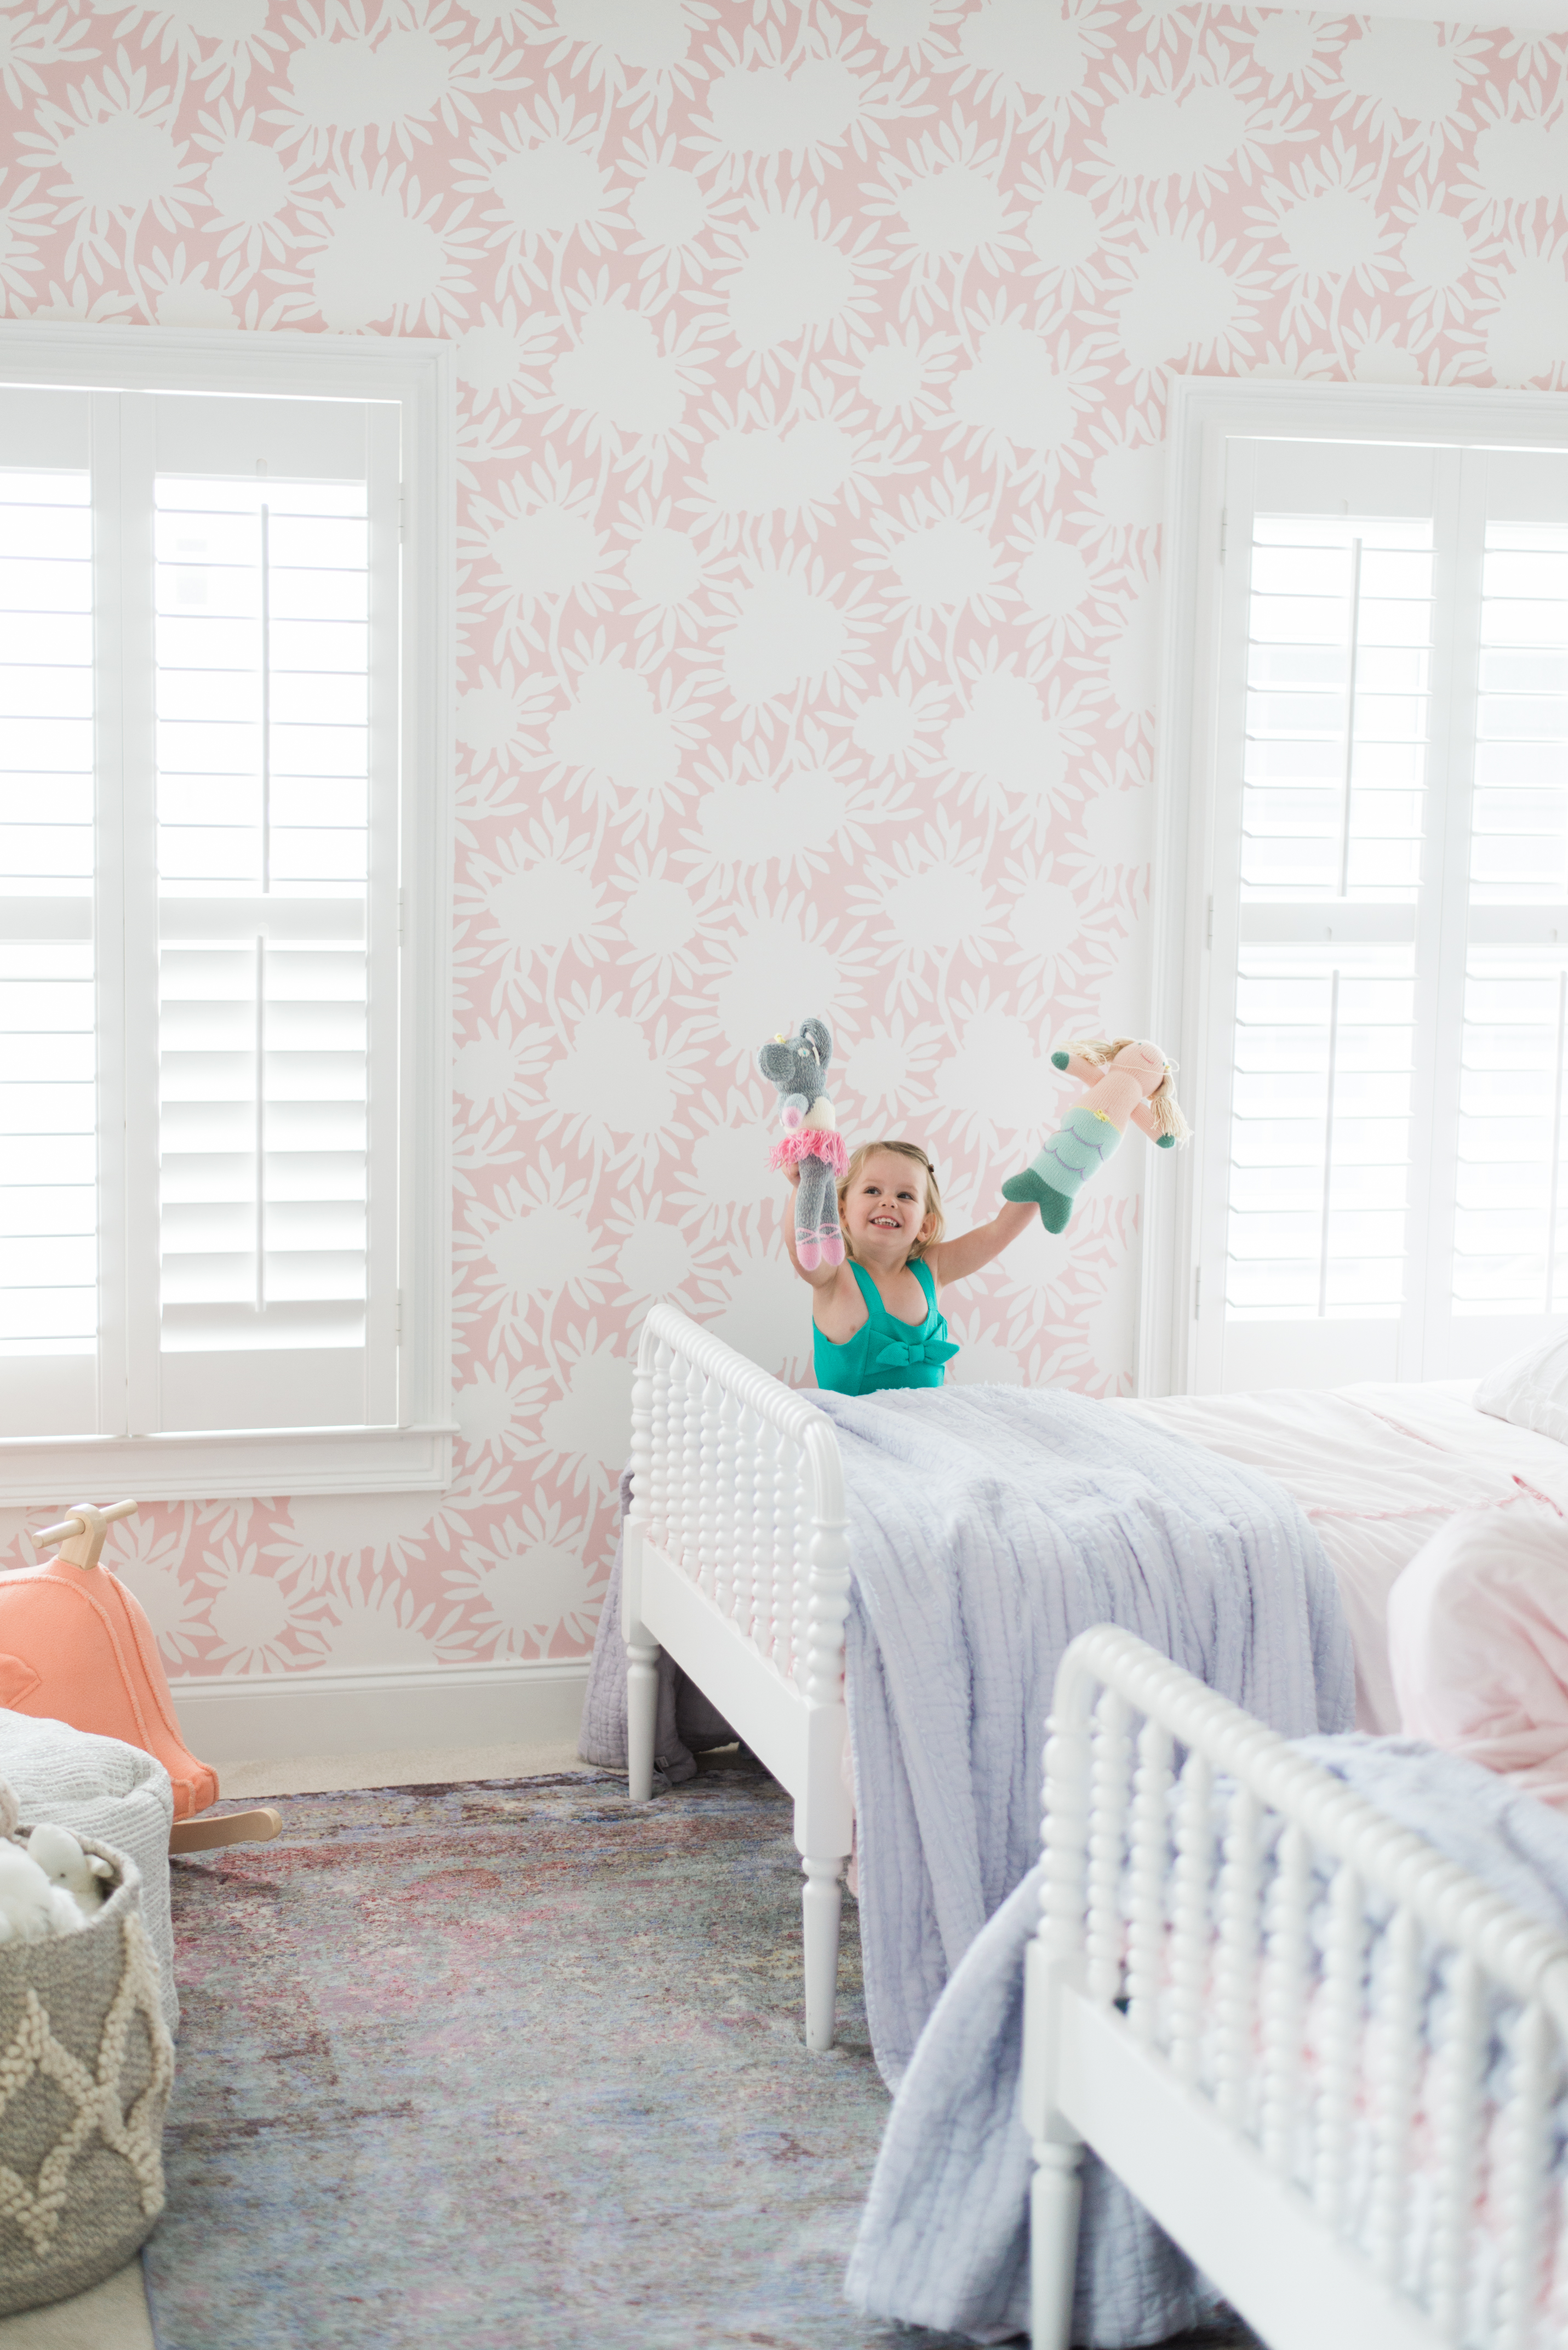 Bookmark this post ASAP! Lifestyle and Motherhood Blogger Meghan Basinger is sharing the perfect whimsical and girl toddler girls room reveal.